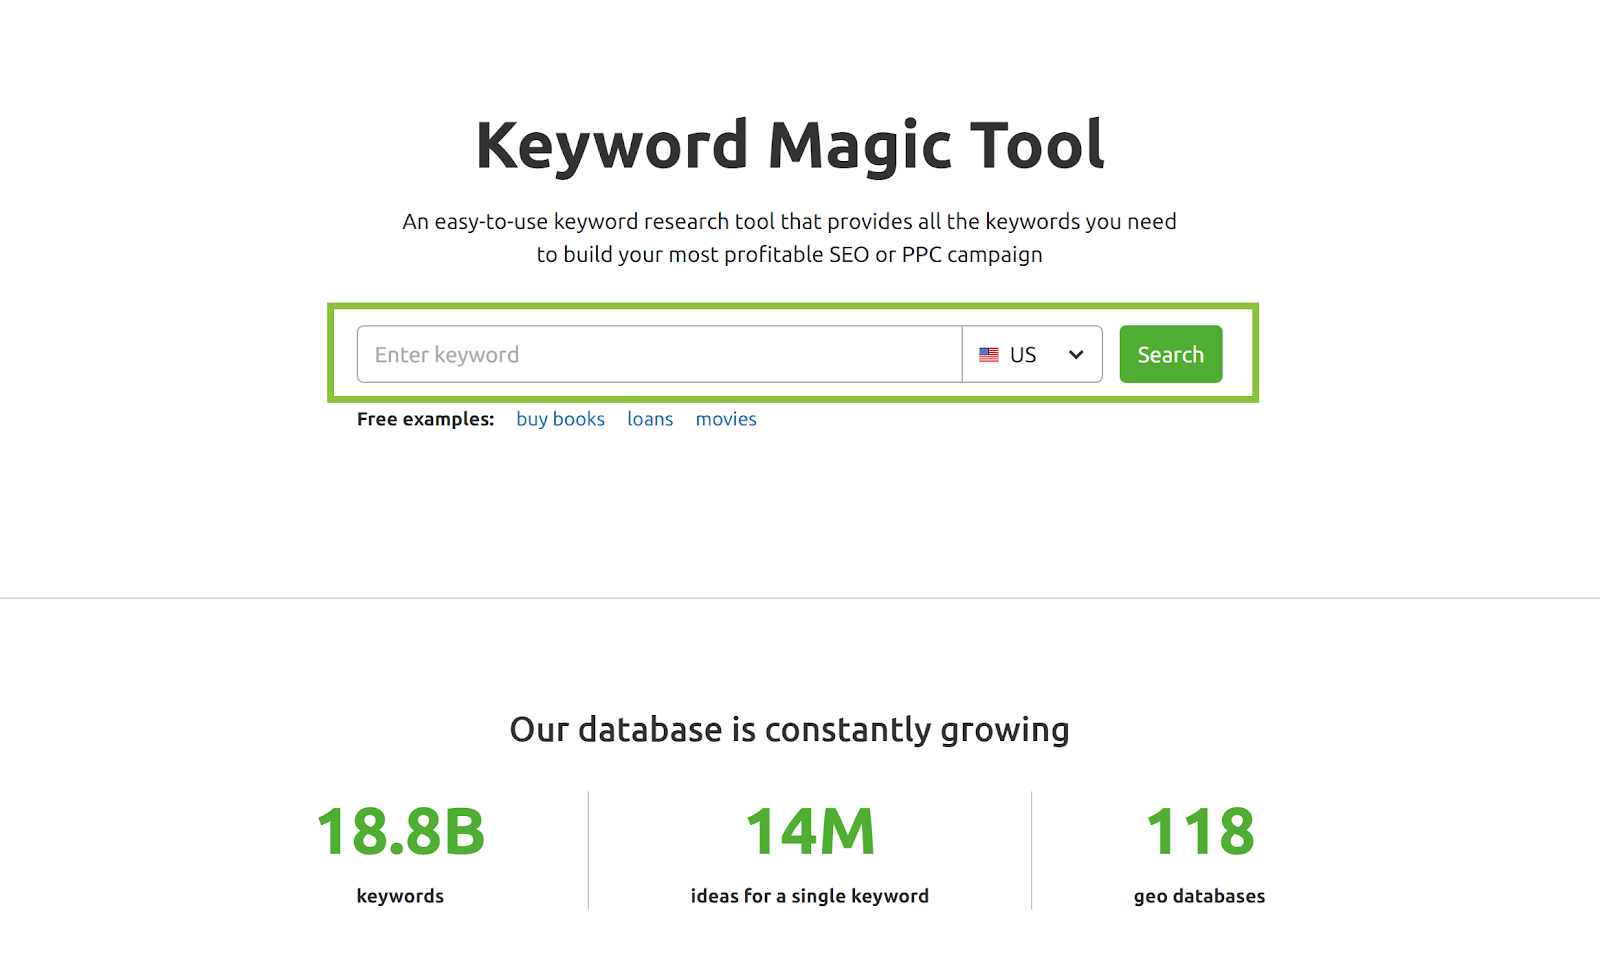 SEMrush Keyword Tool: How to develop an enchanted content strategy